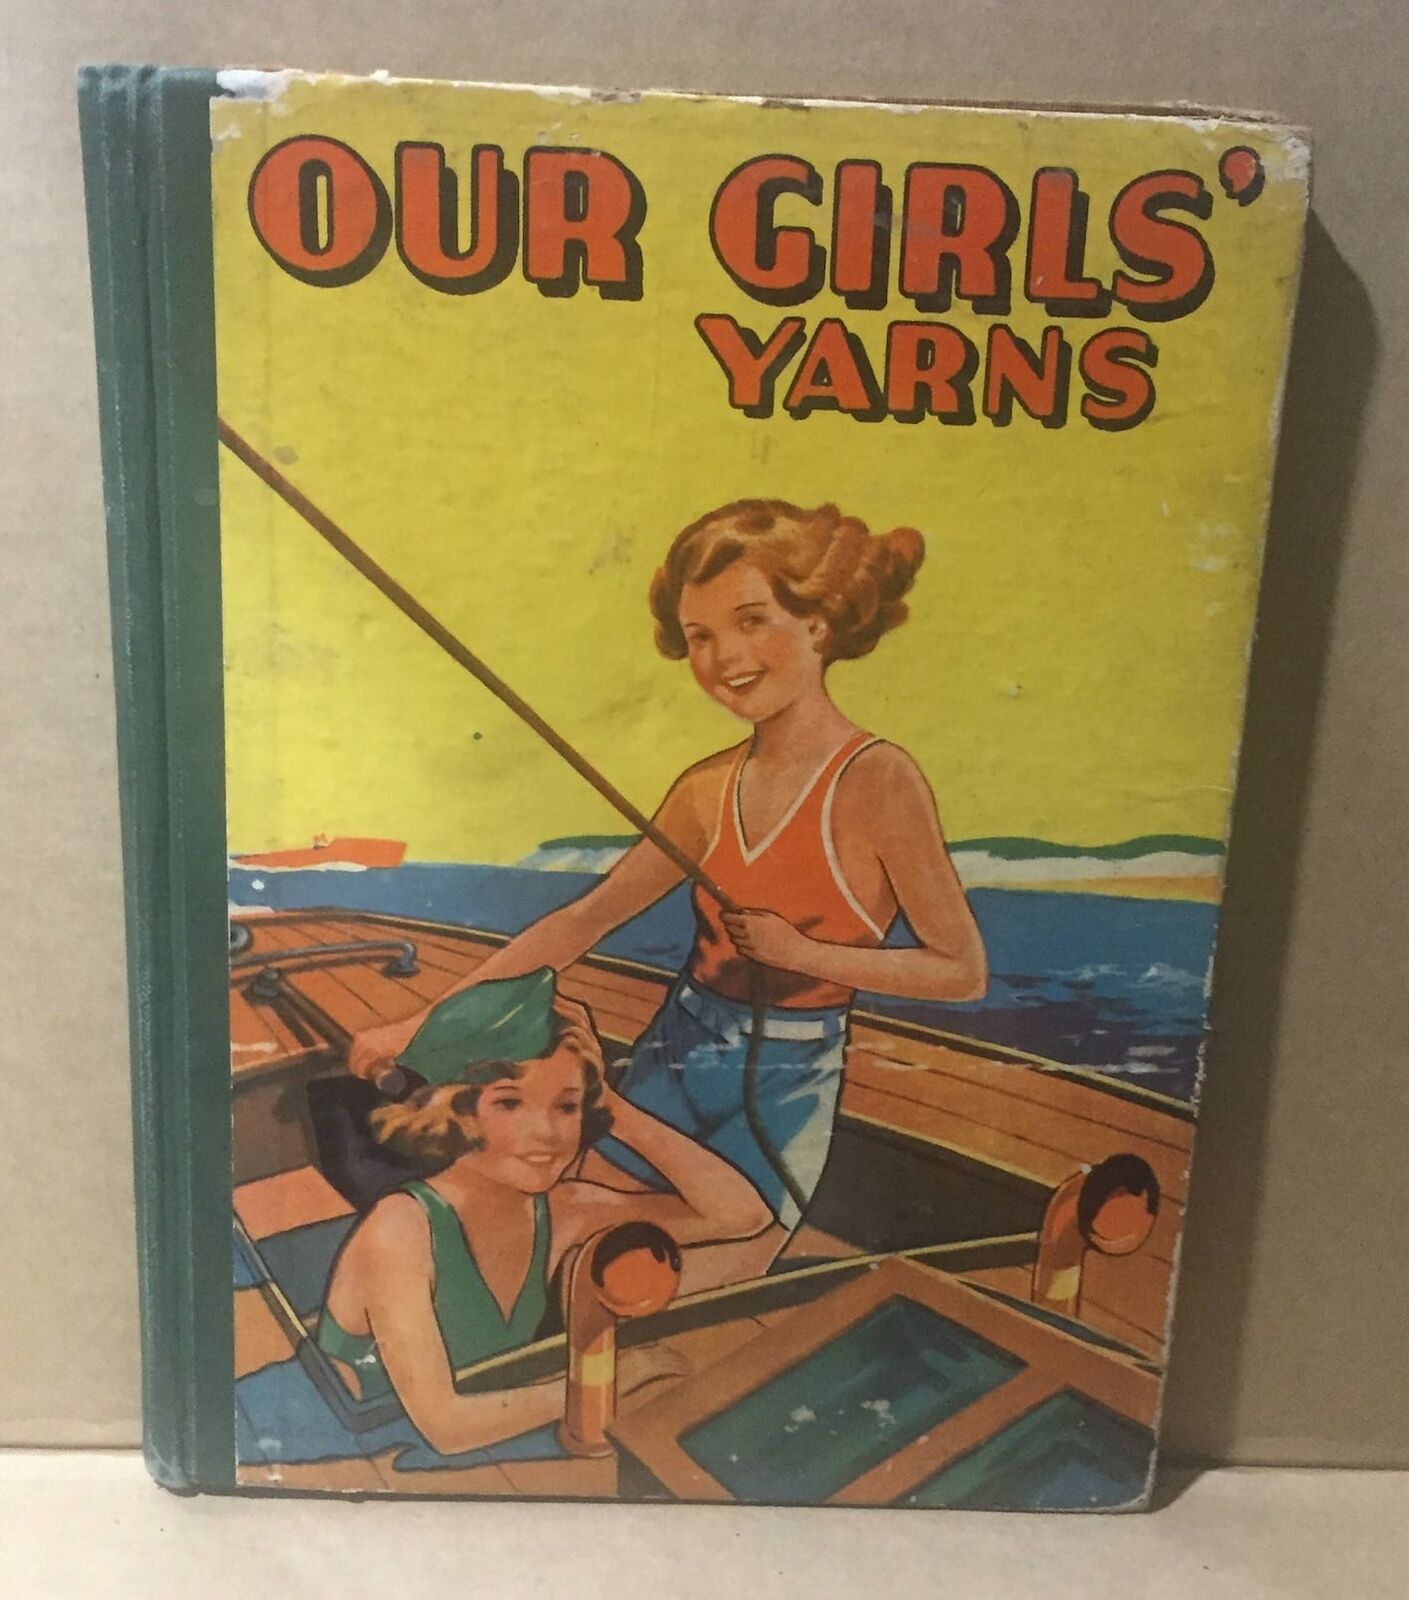 HARD COVER BOOK - OUR GIRLS' YARNS